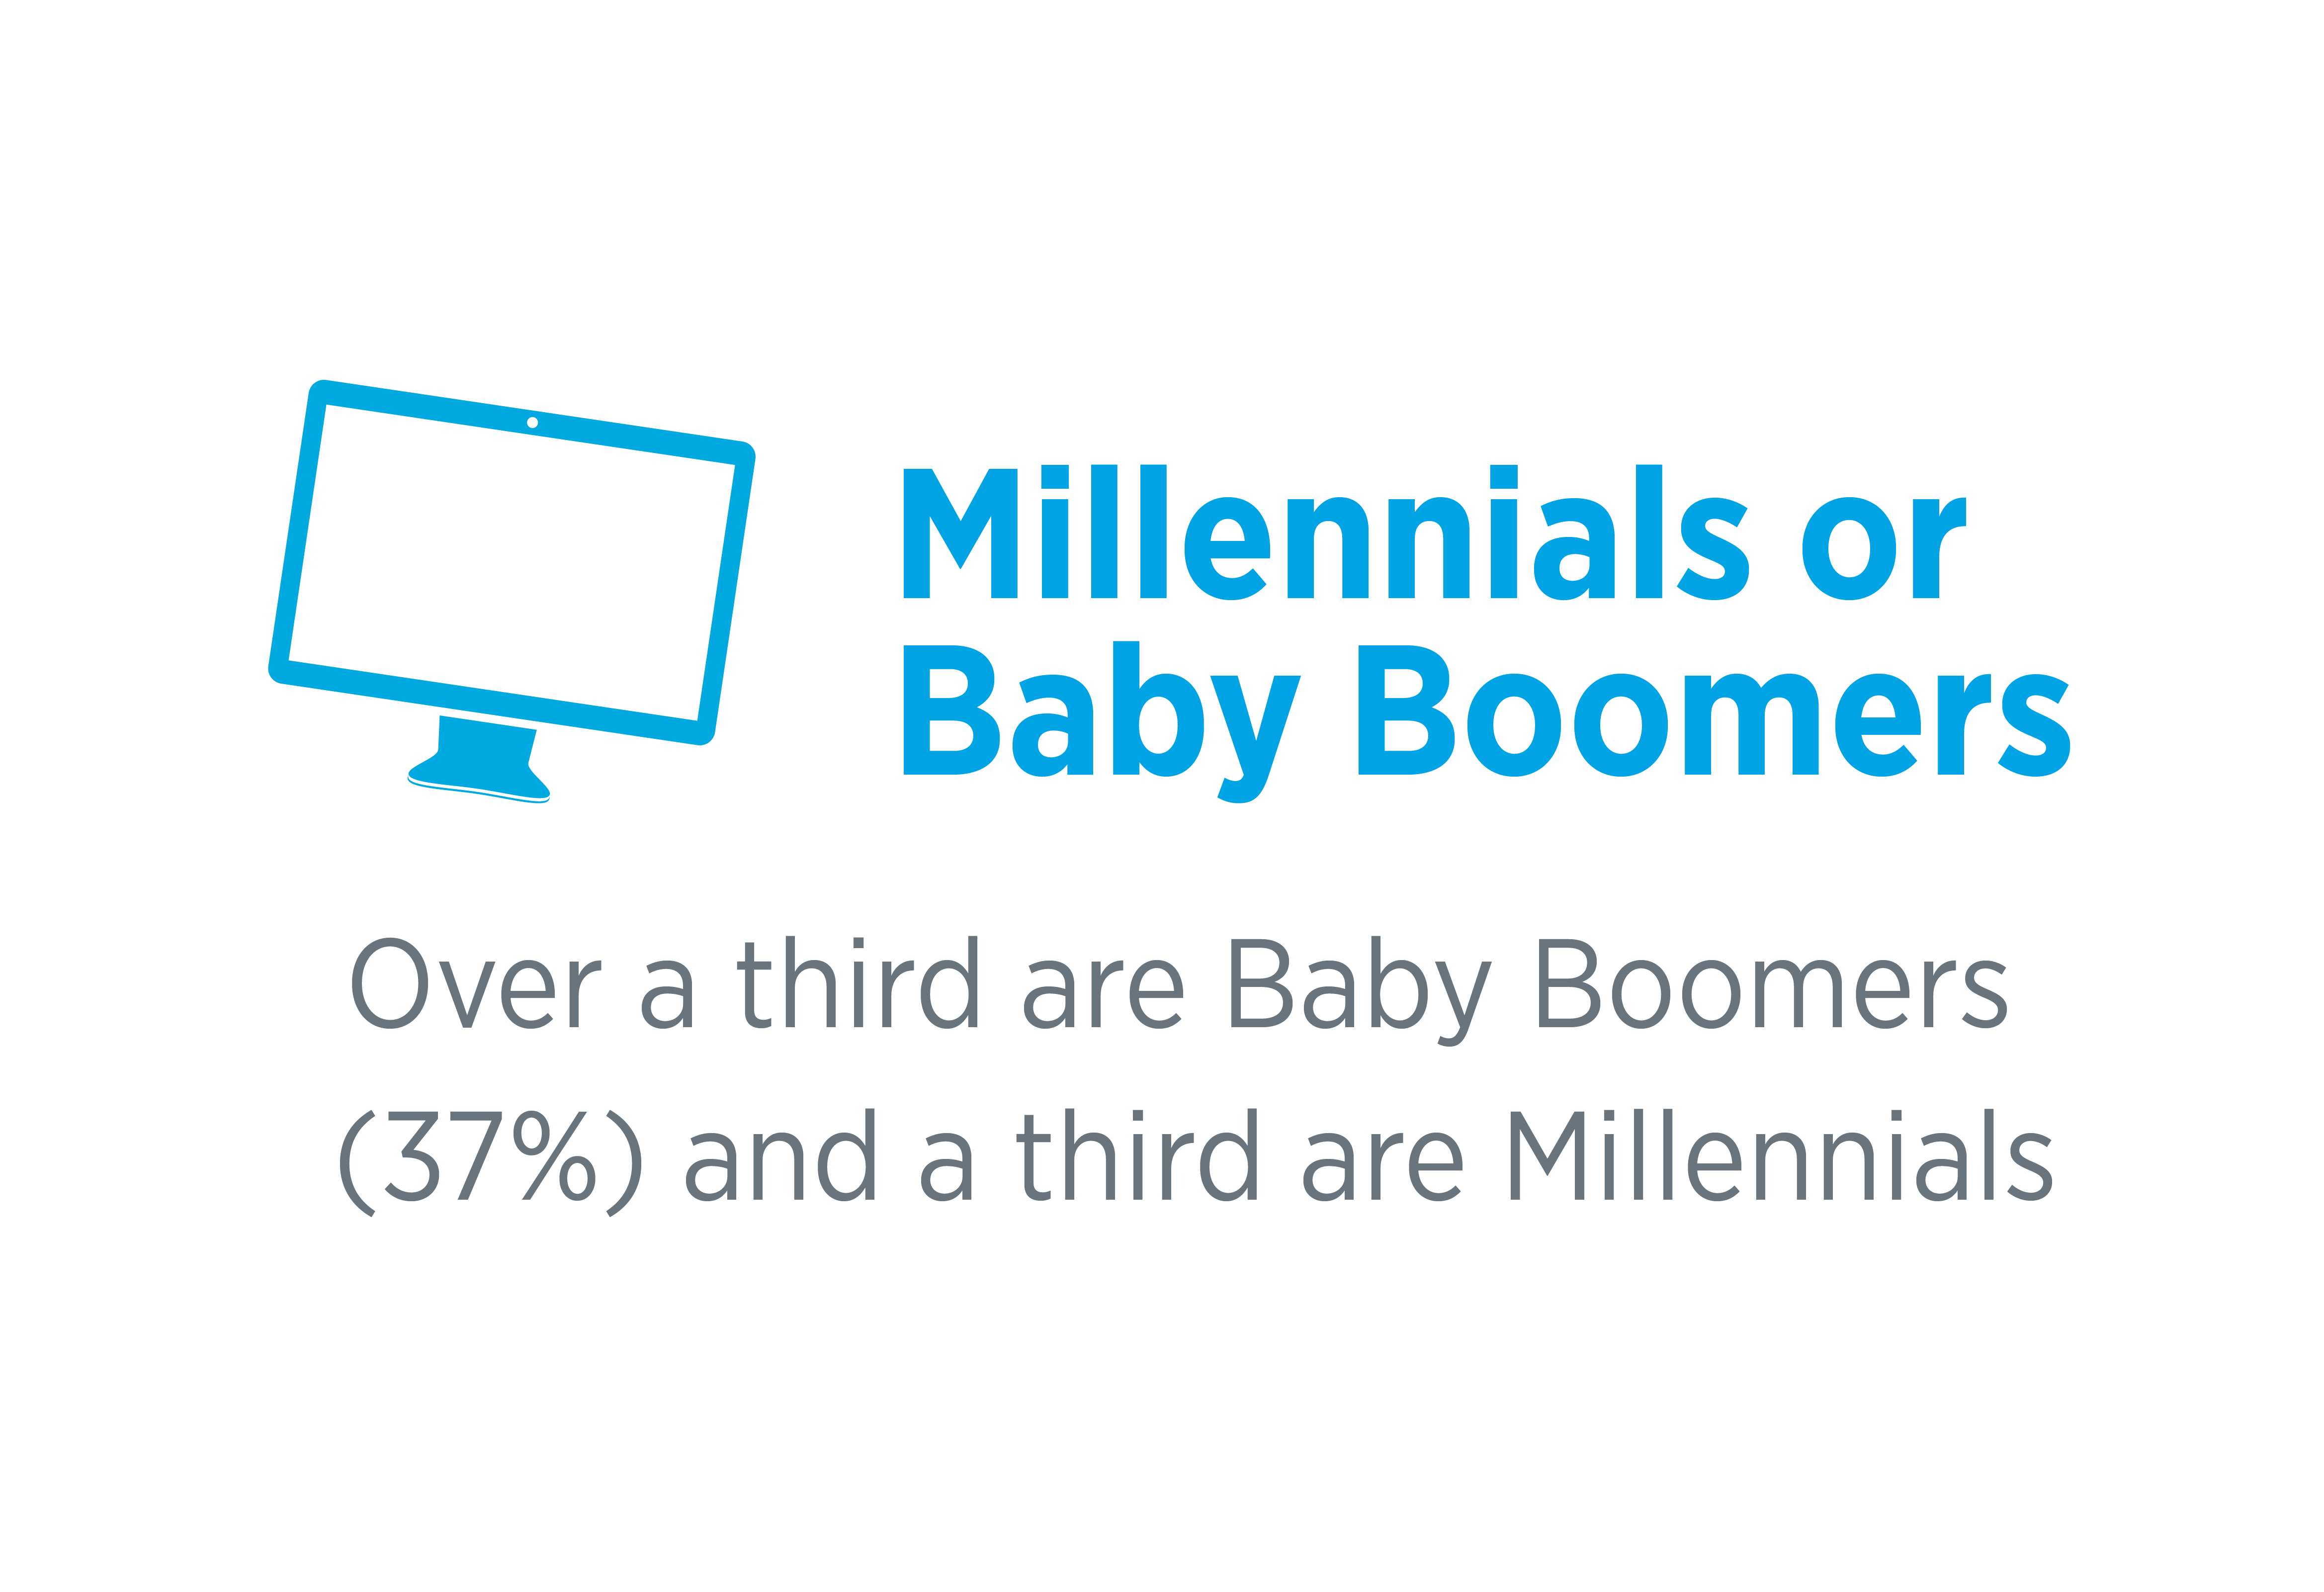 over a third are baby boomers (37%) and a third are millennials